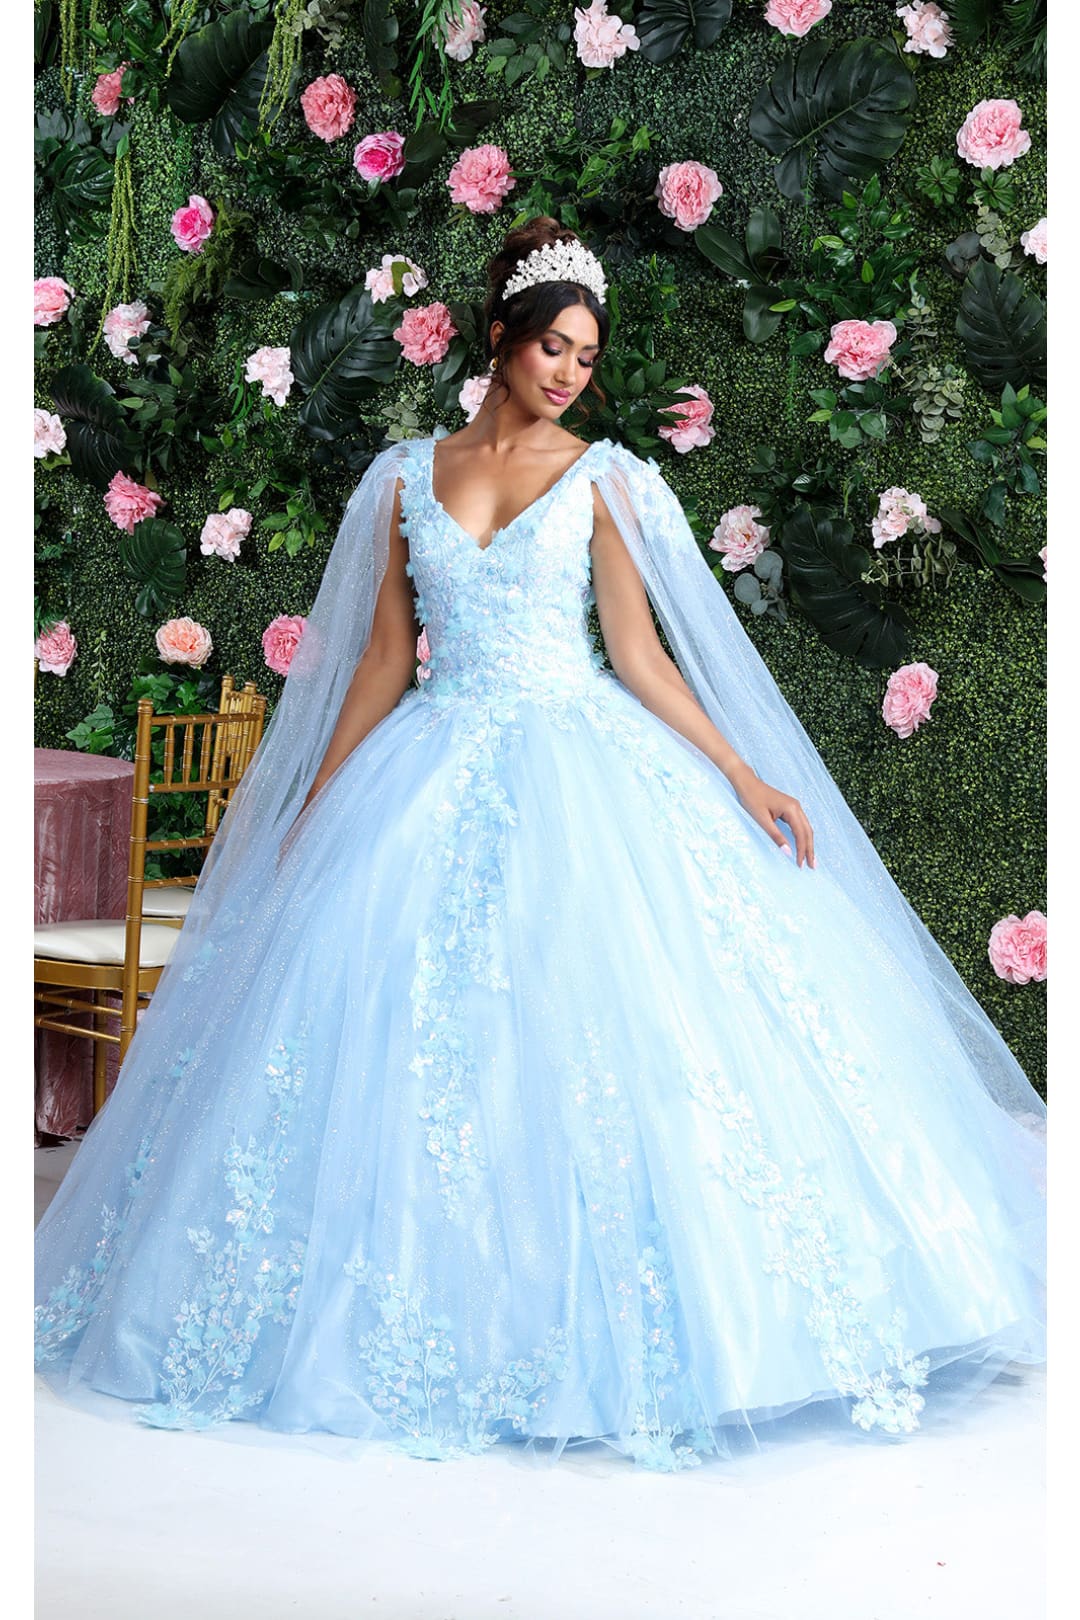 LADIVINE - 15702 | QUINCE BALL GOWN | MADELINE'S BOUTIQUE | BOCA RATON –  Madeline's Boutique